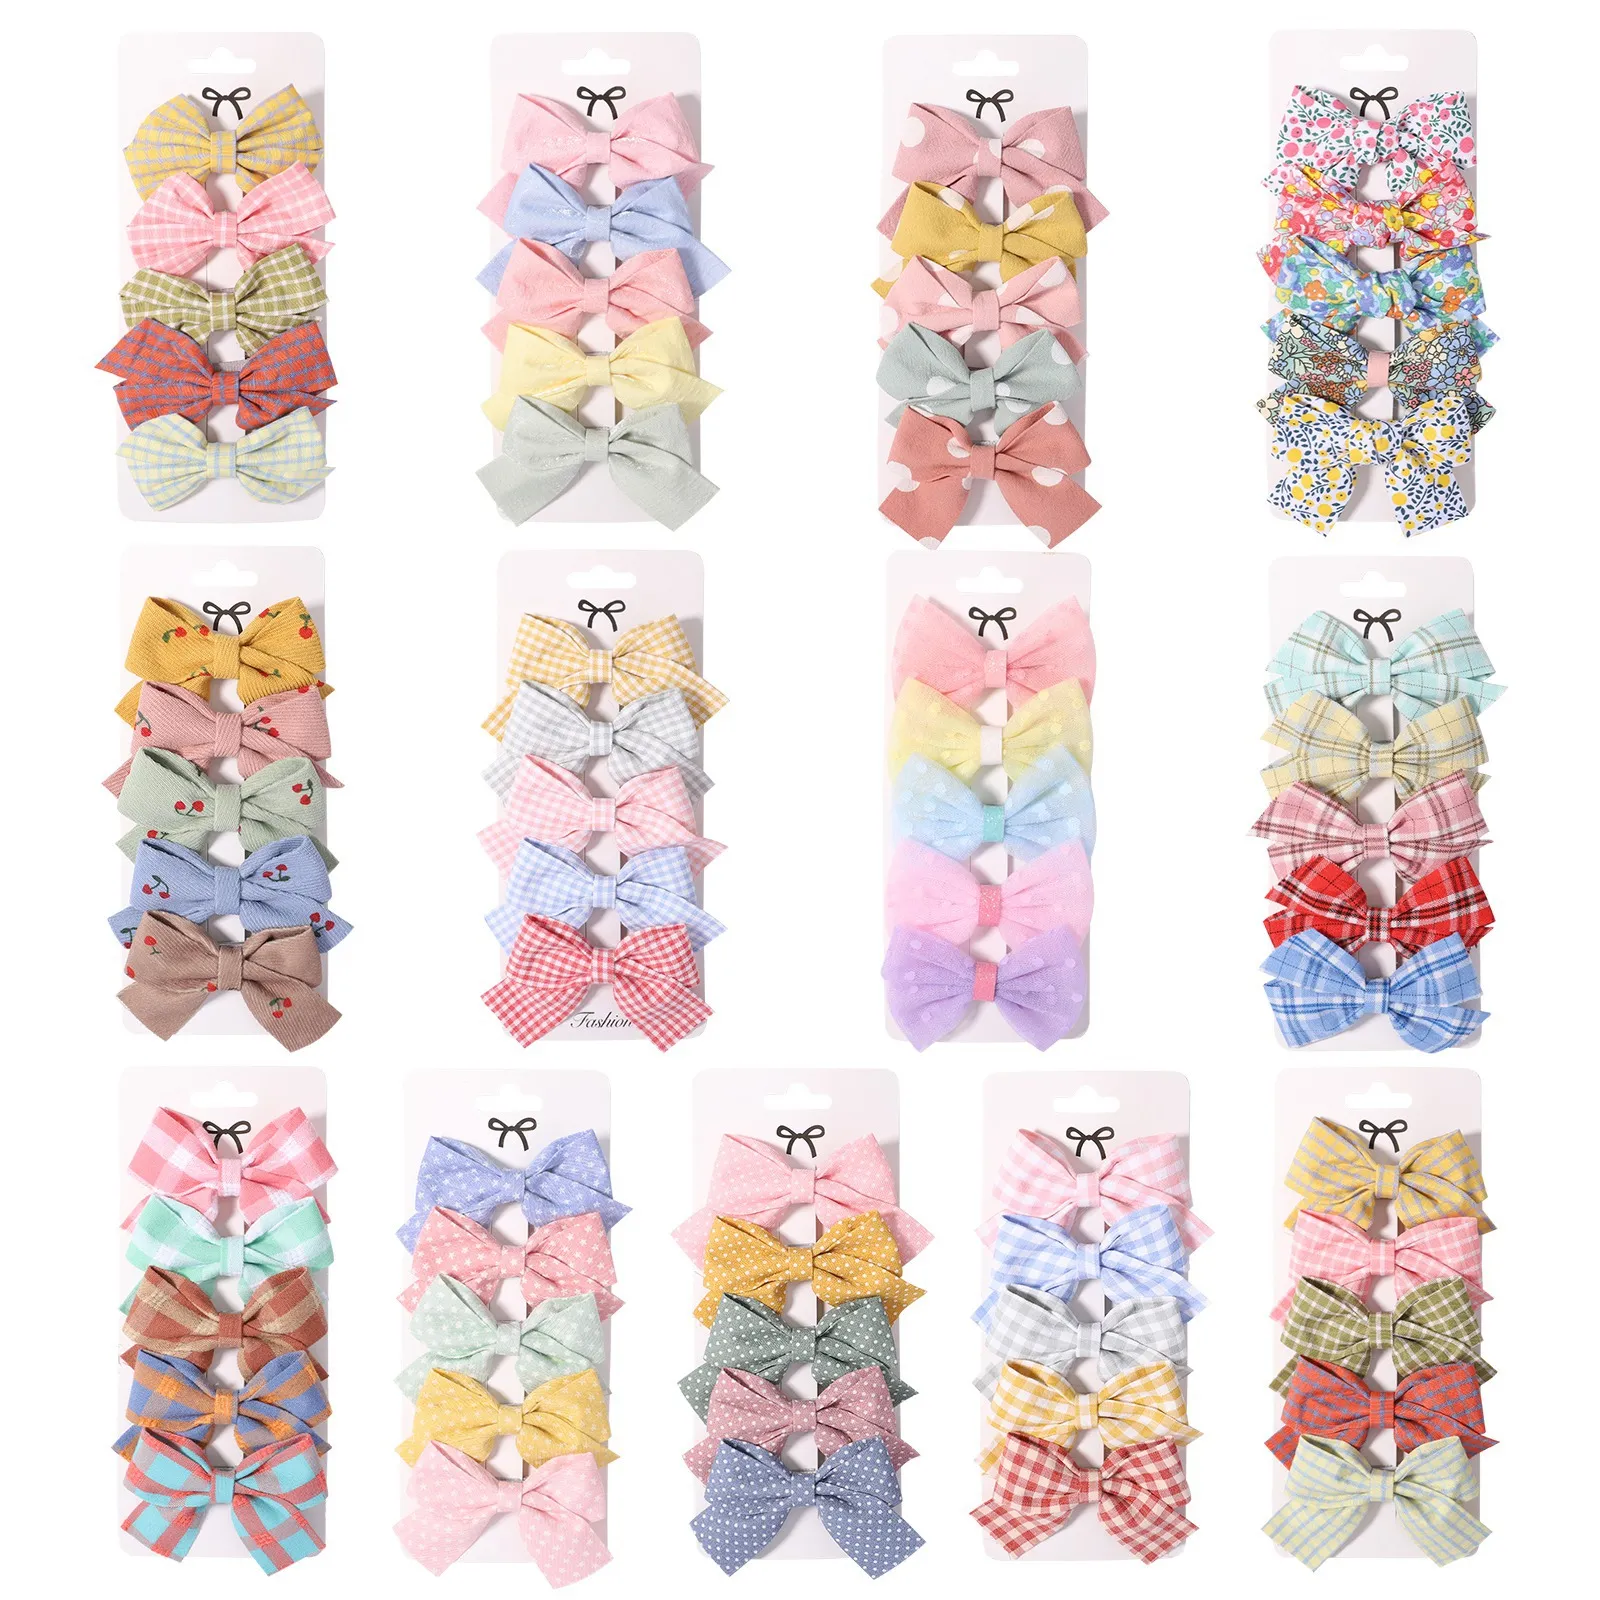 Hair Clips For Girls Baby Kids Bowknot Floral Flower Barrettes Grosgrain Hairpins Clippers Dovetail Bow headwear Festival Hair Accessories 5pcs/set YL1615J